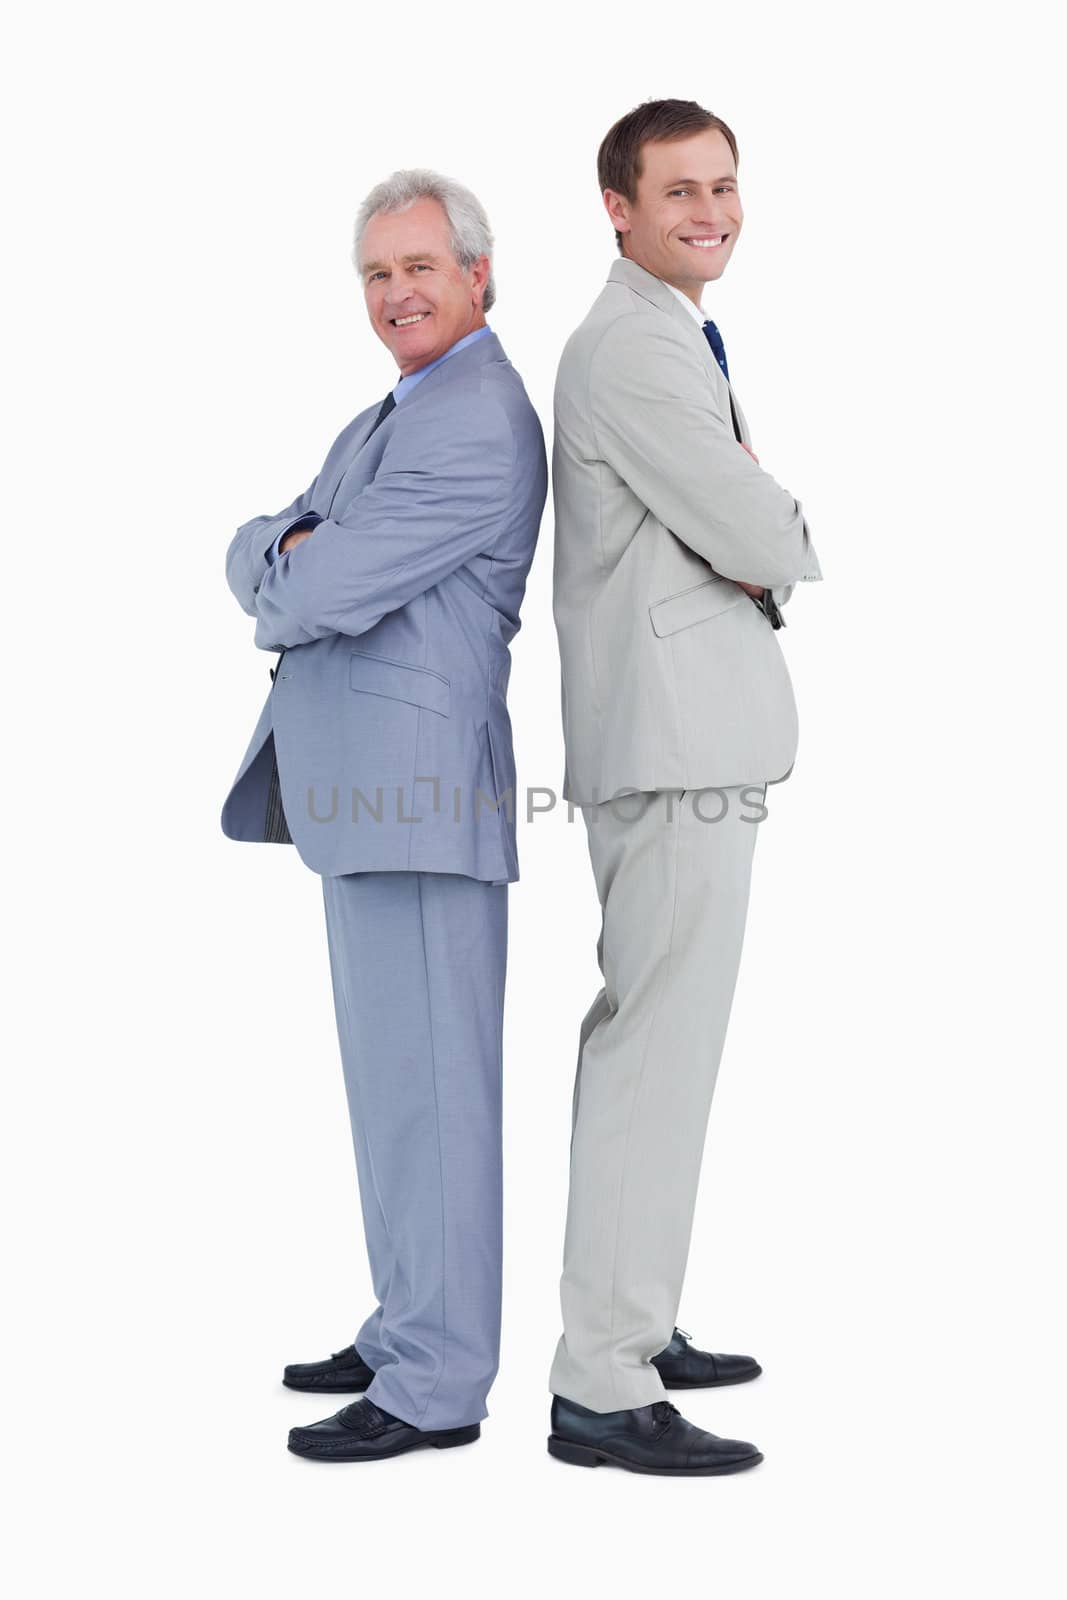 Smiling tradesmen standing back to back against a white background